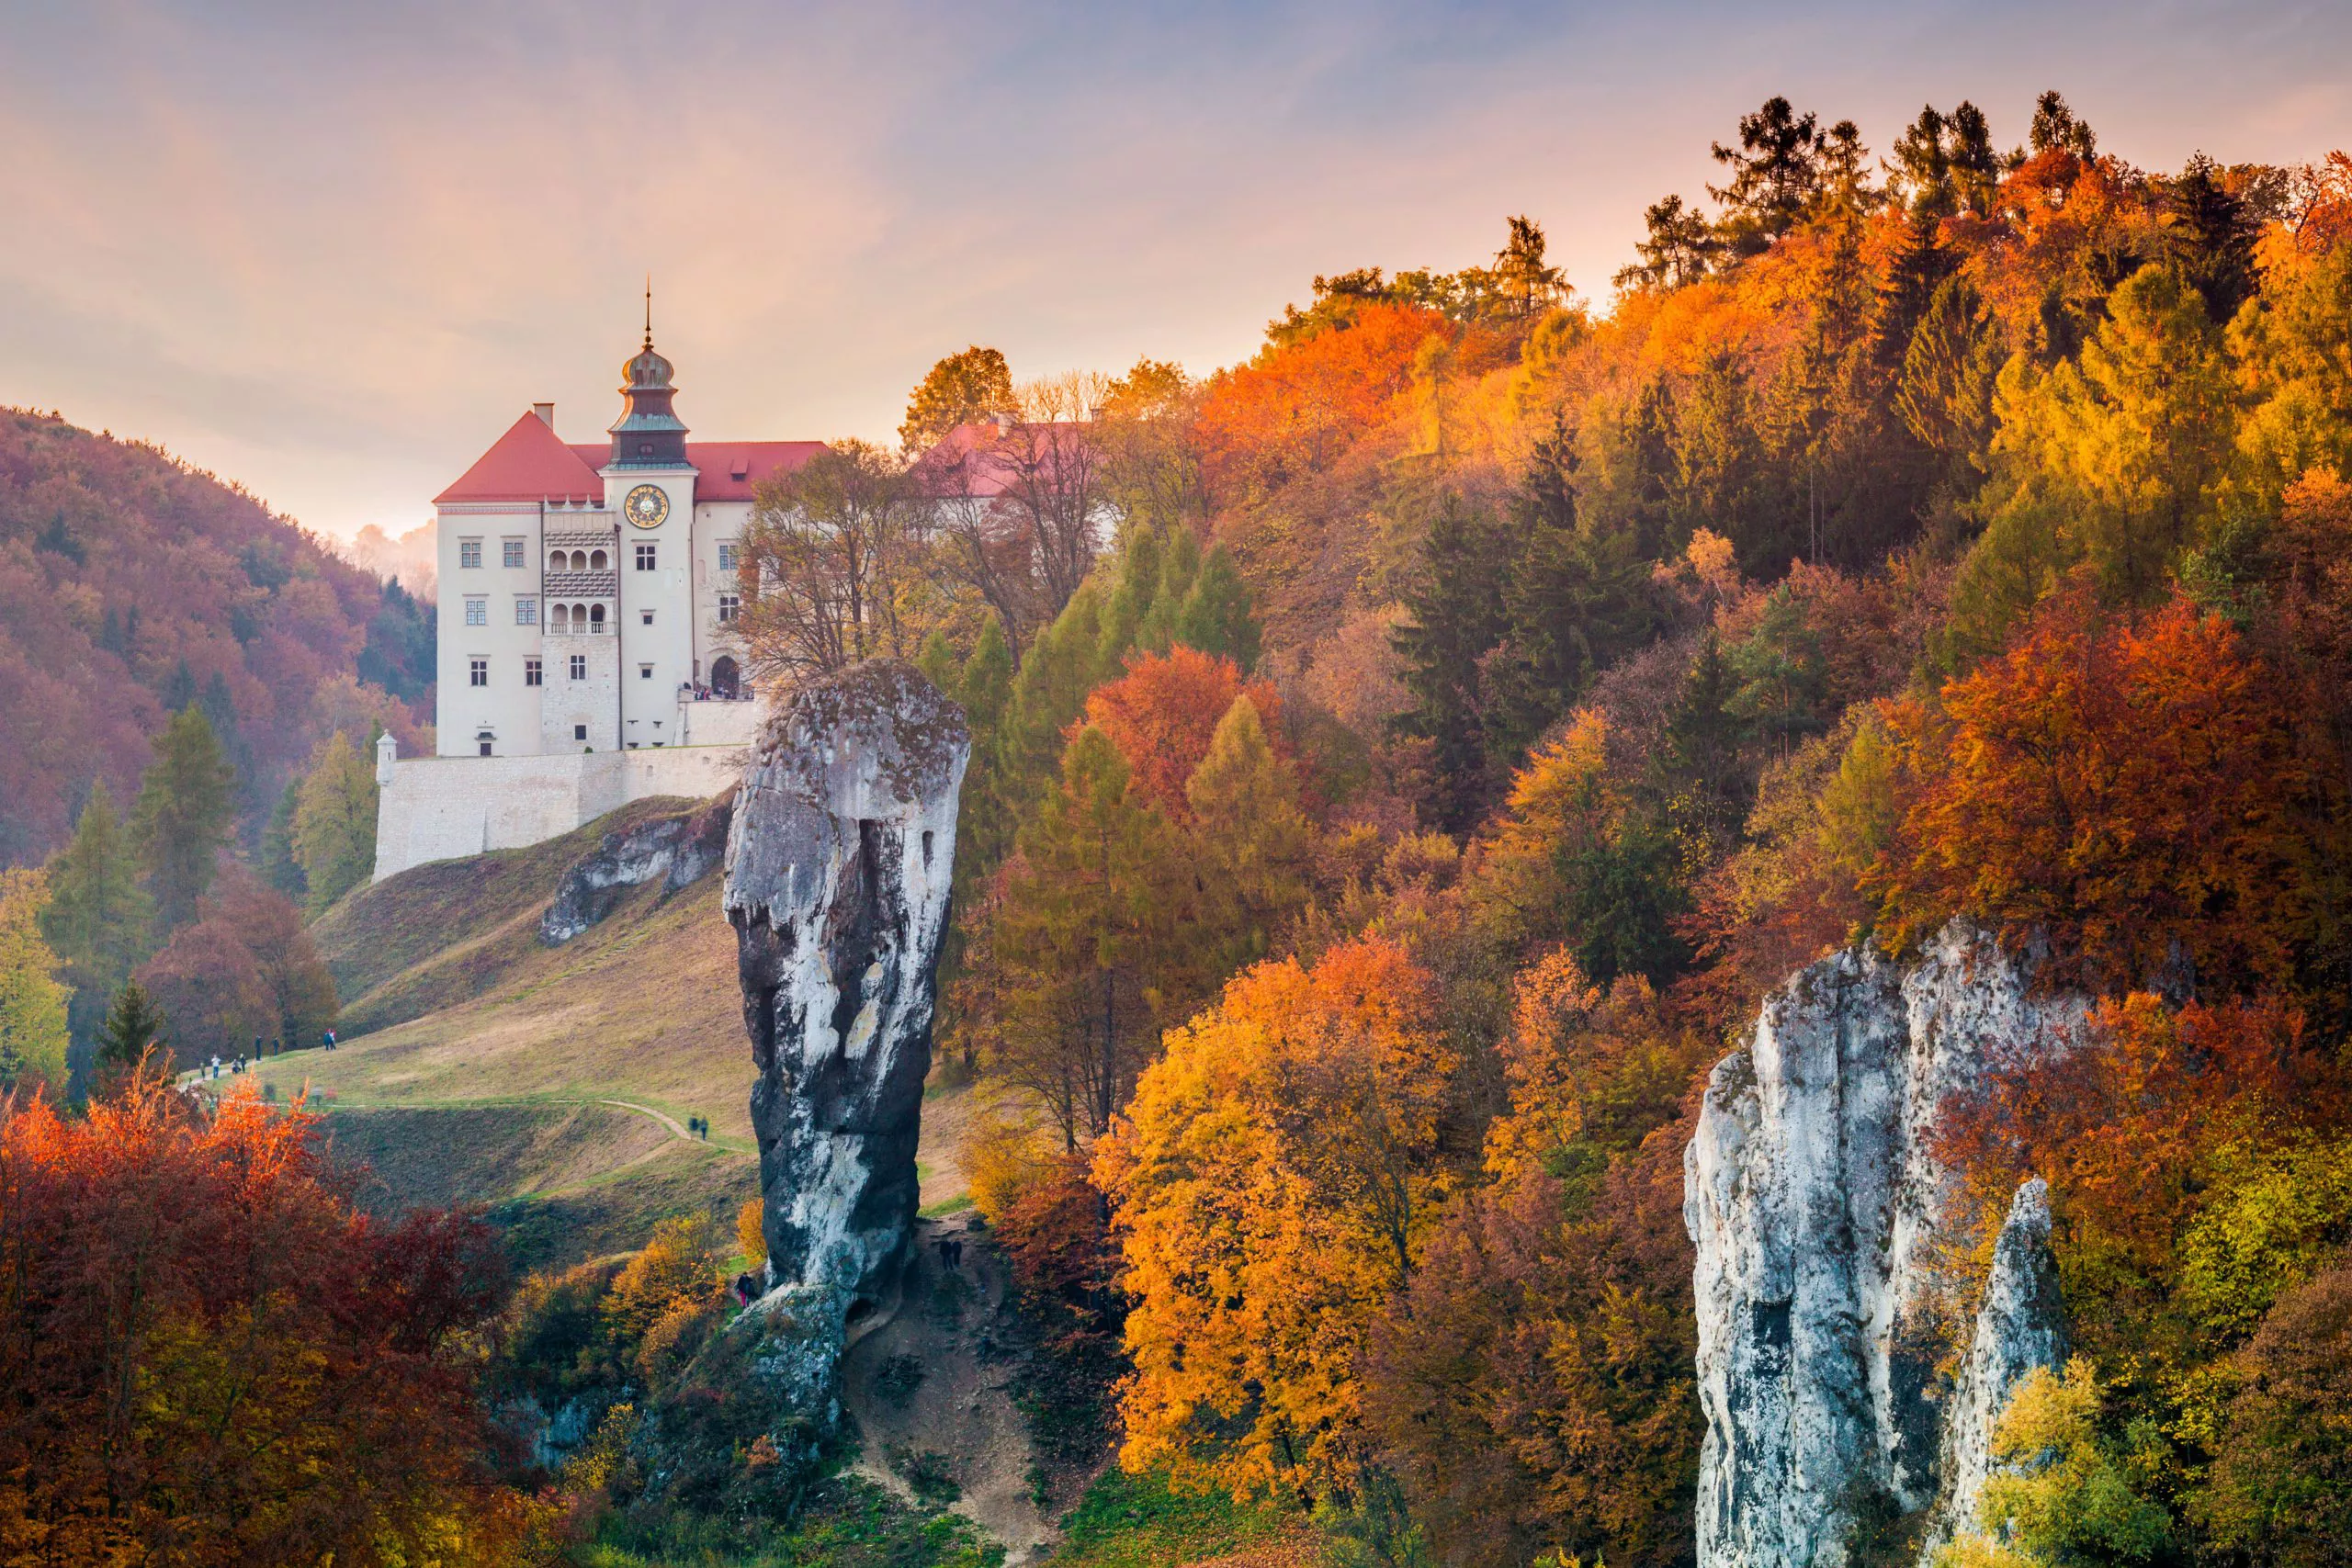 A section of white-walled and red-roofed Pieskowa Skała Castle peers from behind an auburn-and-green forest taking most of the picture on the right. In front of the trees: two massifs of limestone rock, the left one being the Hercules mace, a solitary standing “needle” of limestone. The whole, including another hill to the left of the castle, is in very warm colours of autumn evening.